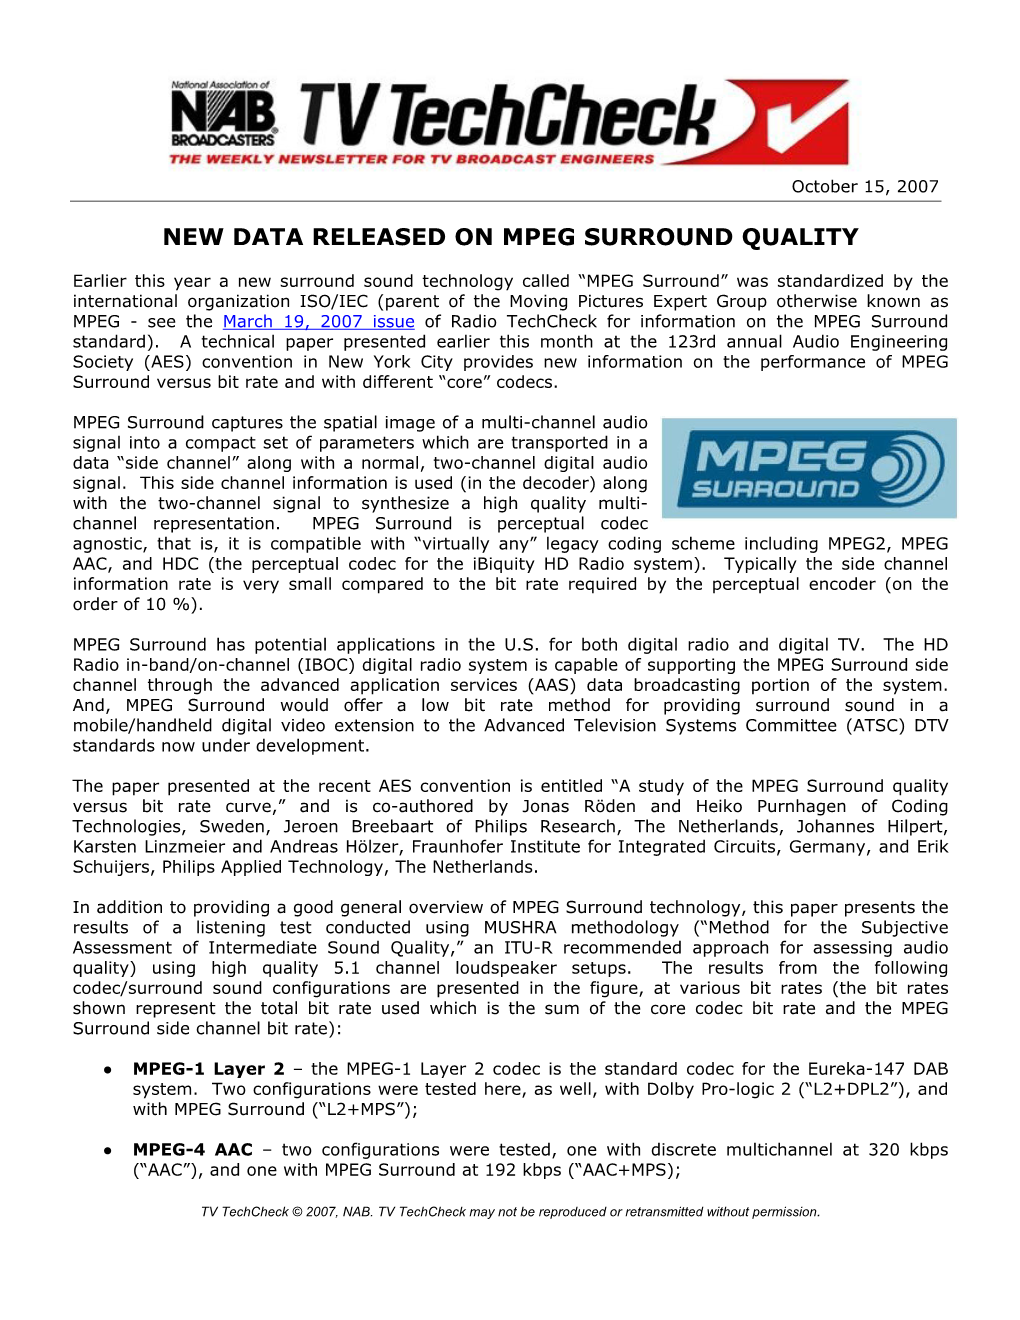 New Data Released on Mpeg Surround Quality